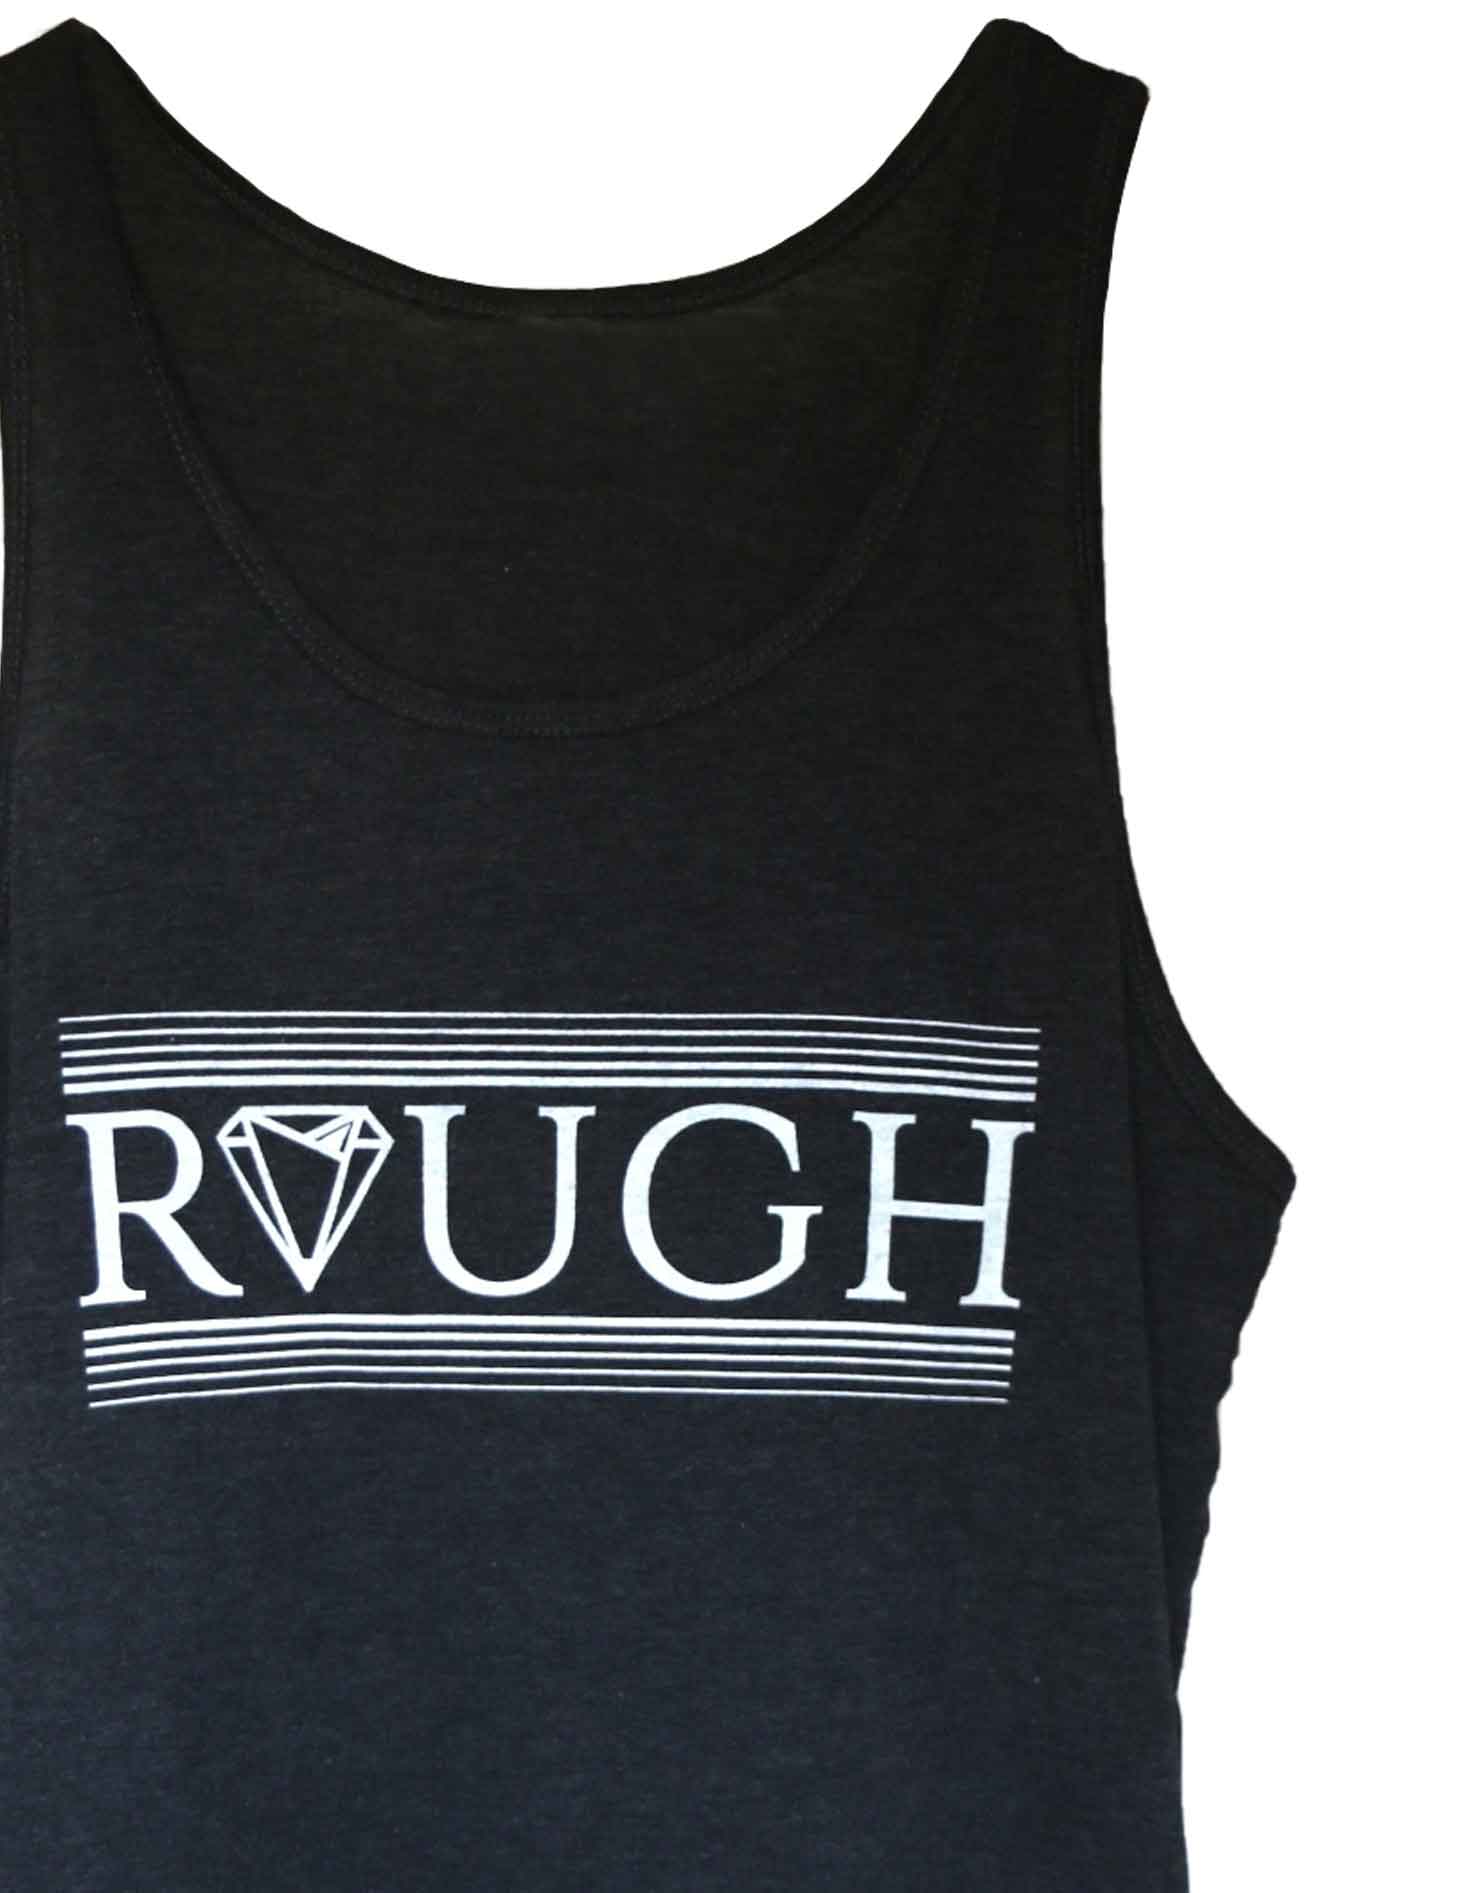 Black Diamond in the rough tank top by Androgynous Fox